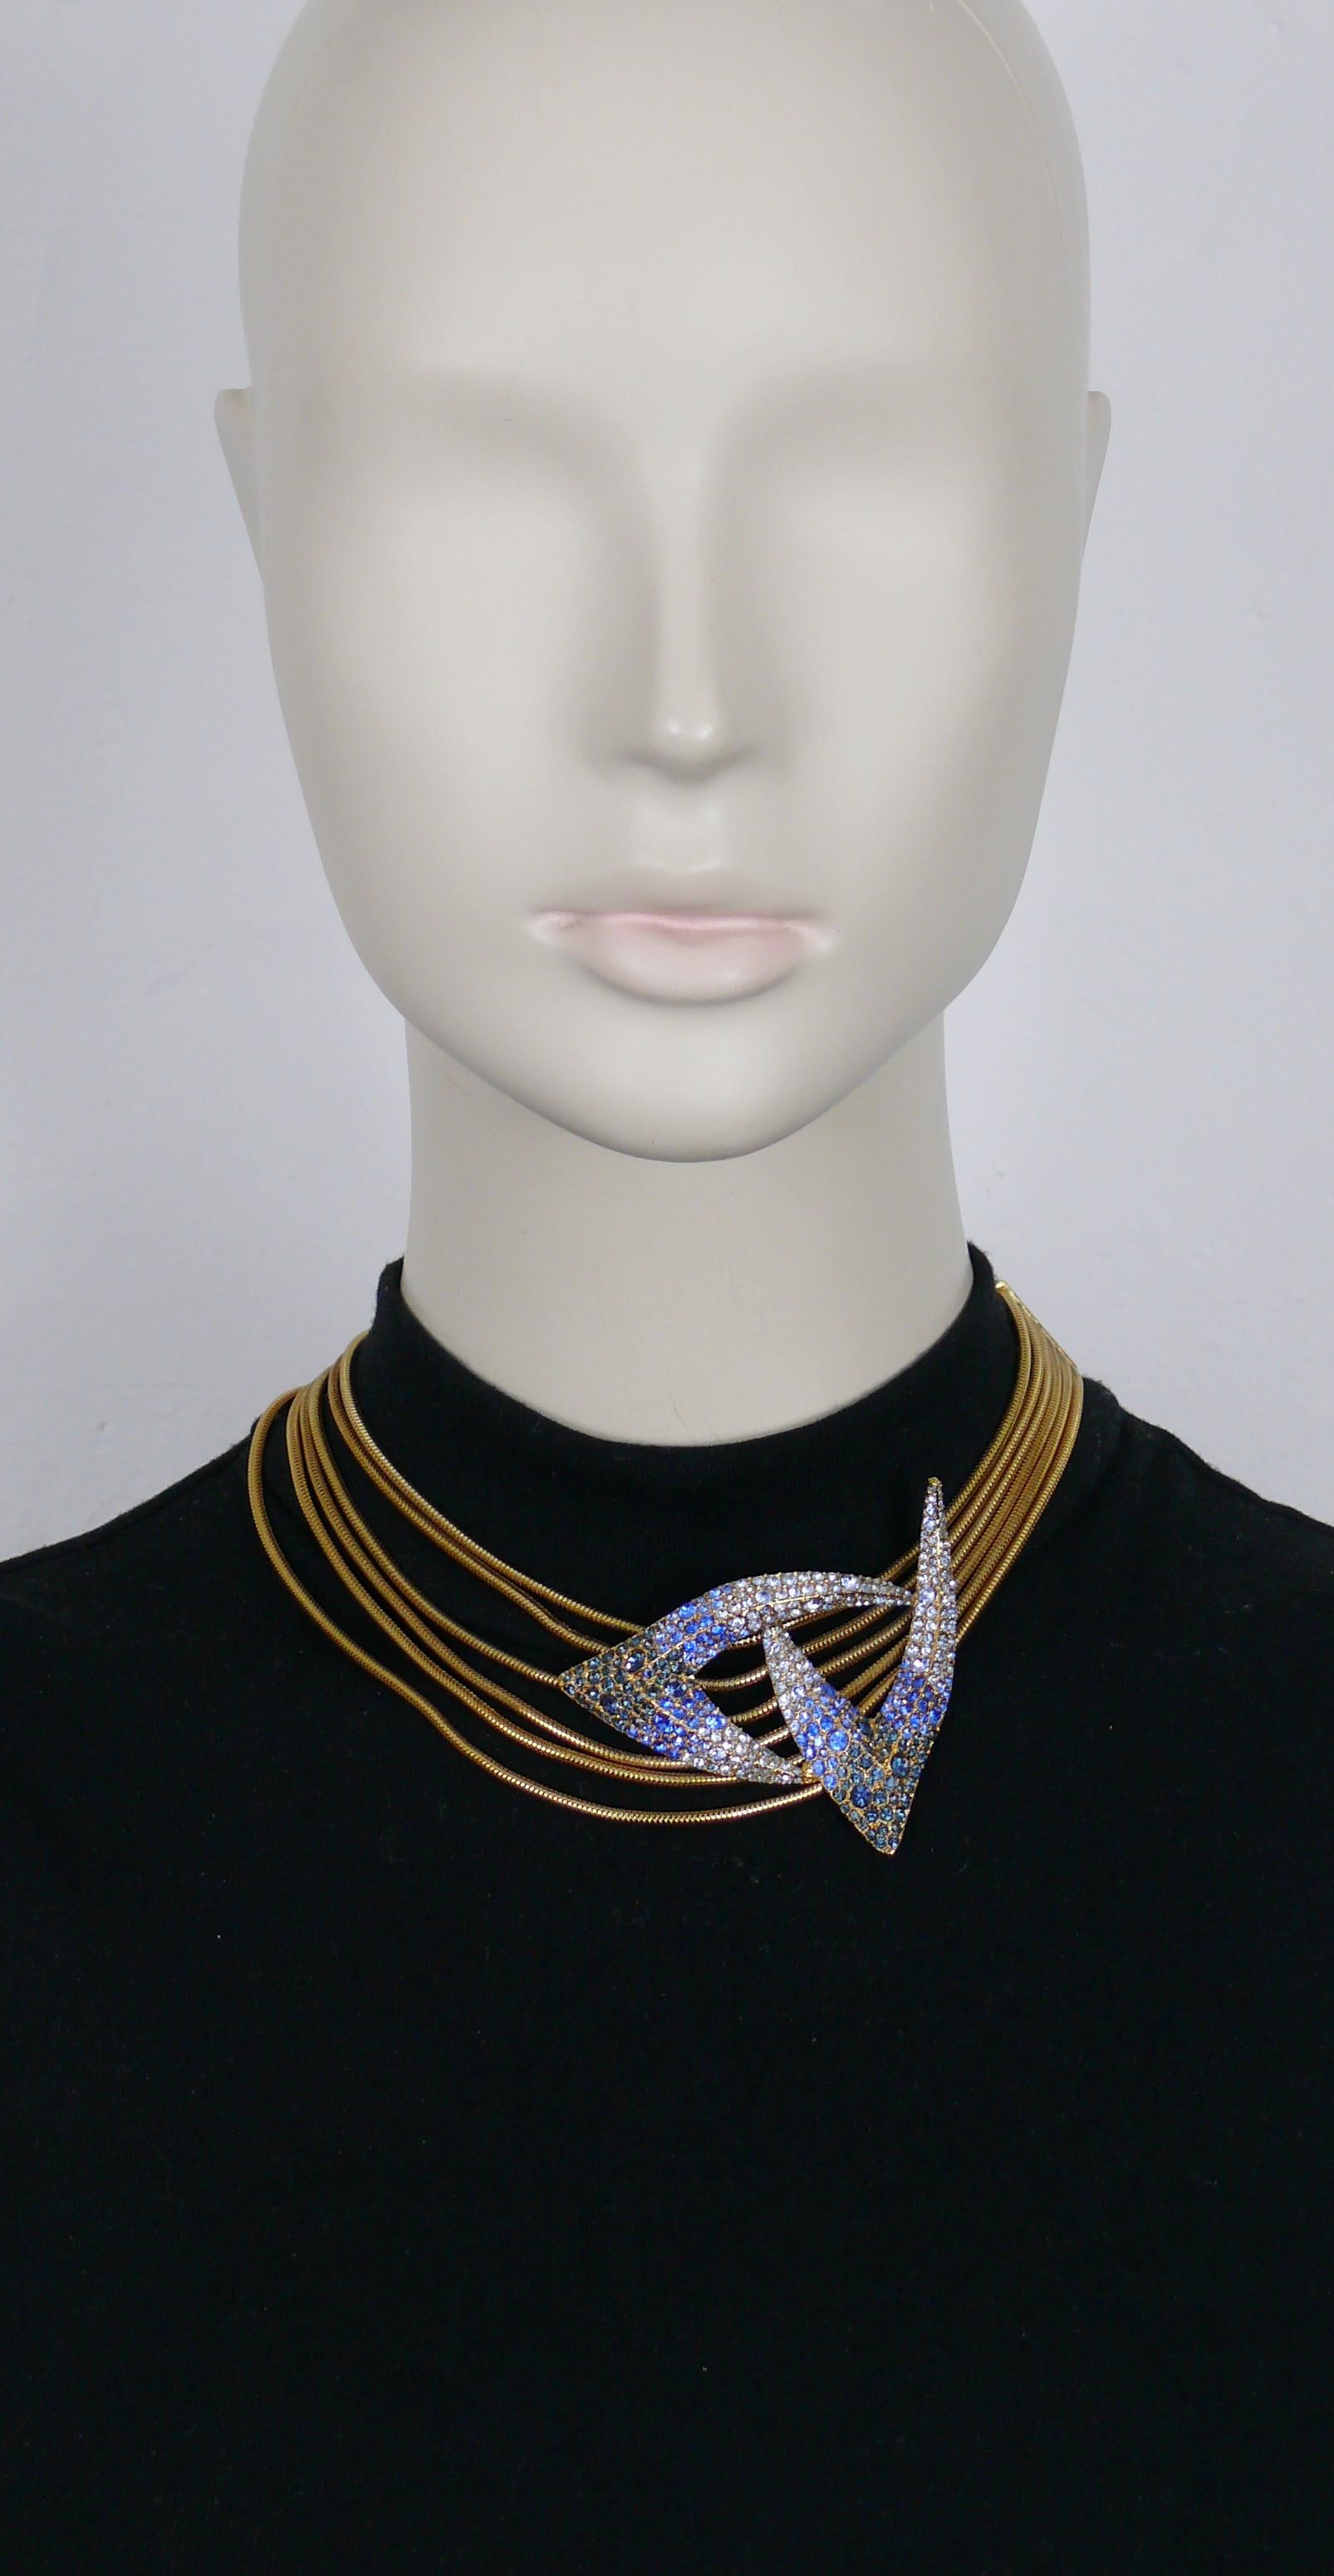 THIERRY MUGLER vintage gold tone snake chains collar necklace featuring a claw design centrepiece embellished with blue shade crystals.

Adjustable hook clasp closure.

Embossed THIERRY MUGLER.

Indicative measurements : length from approx. 35 cm